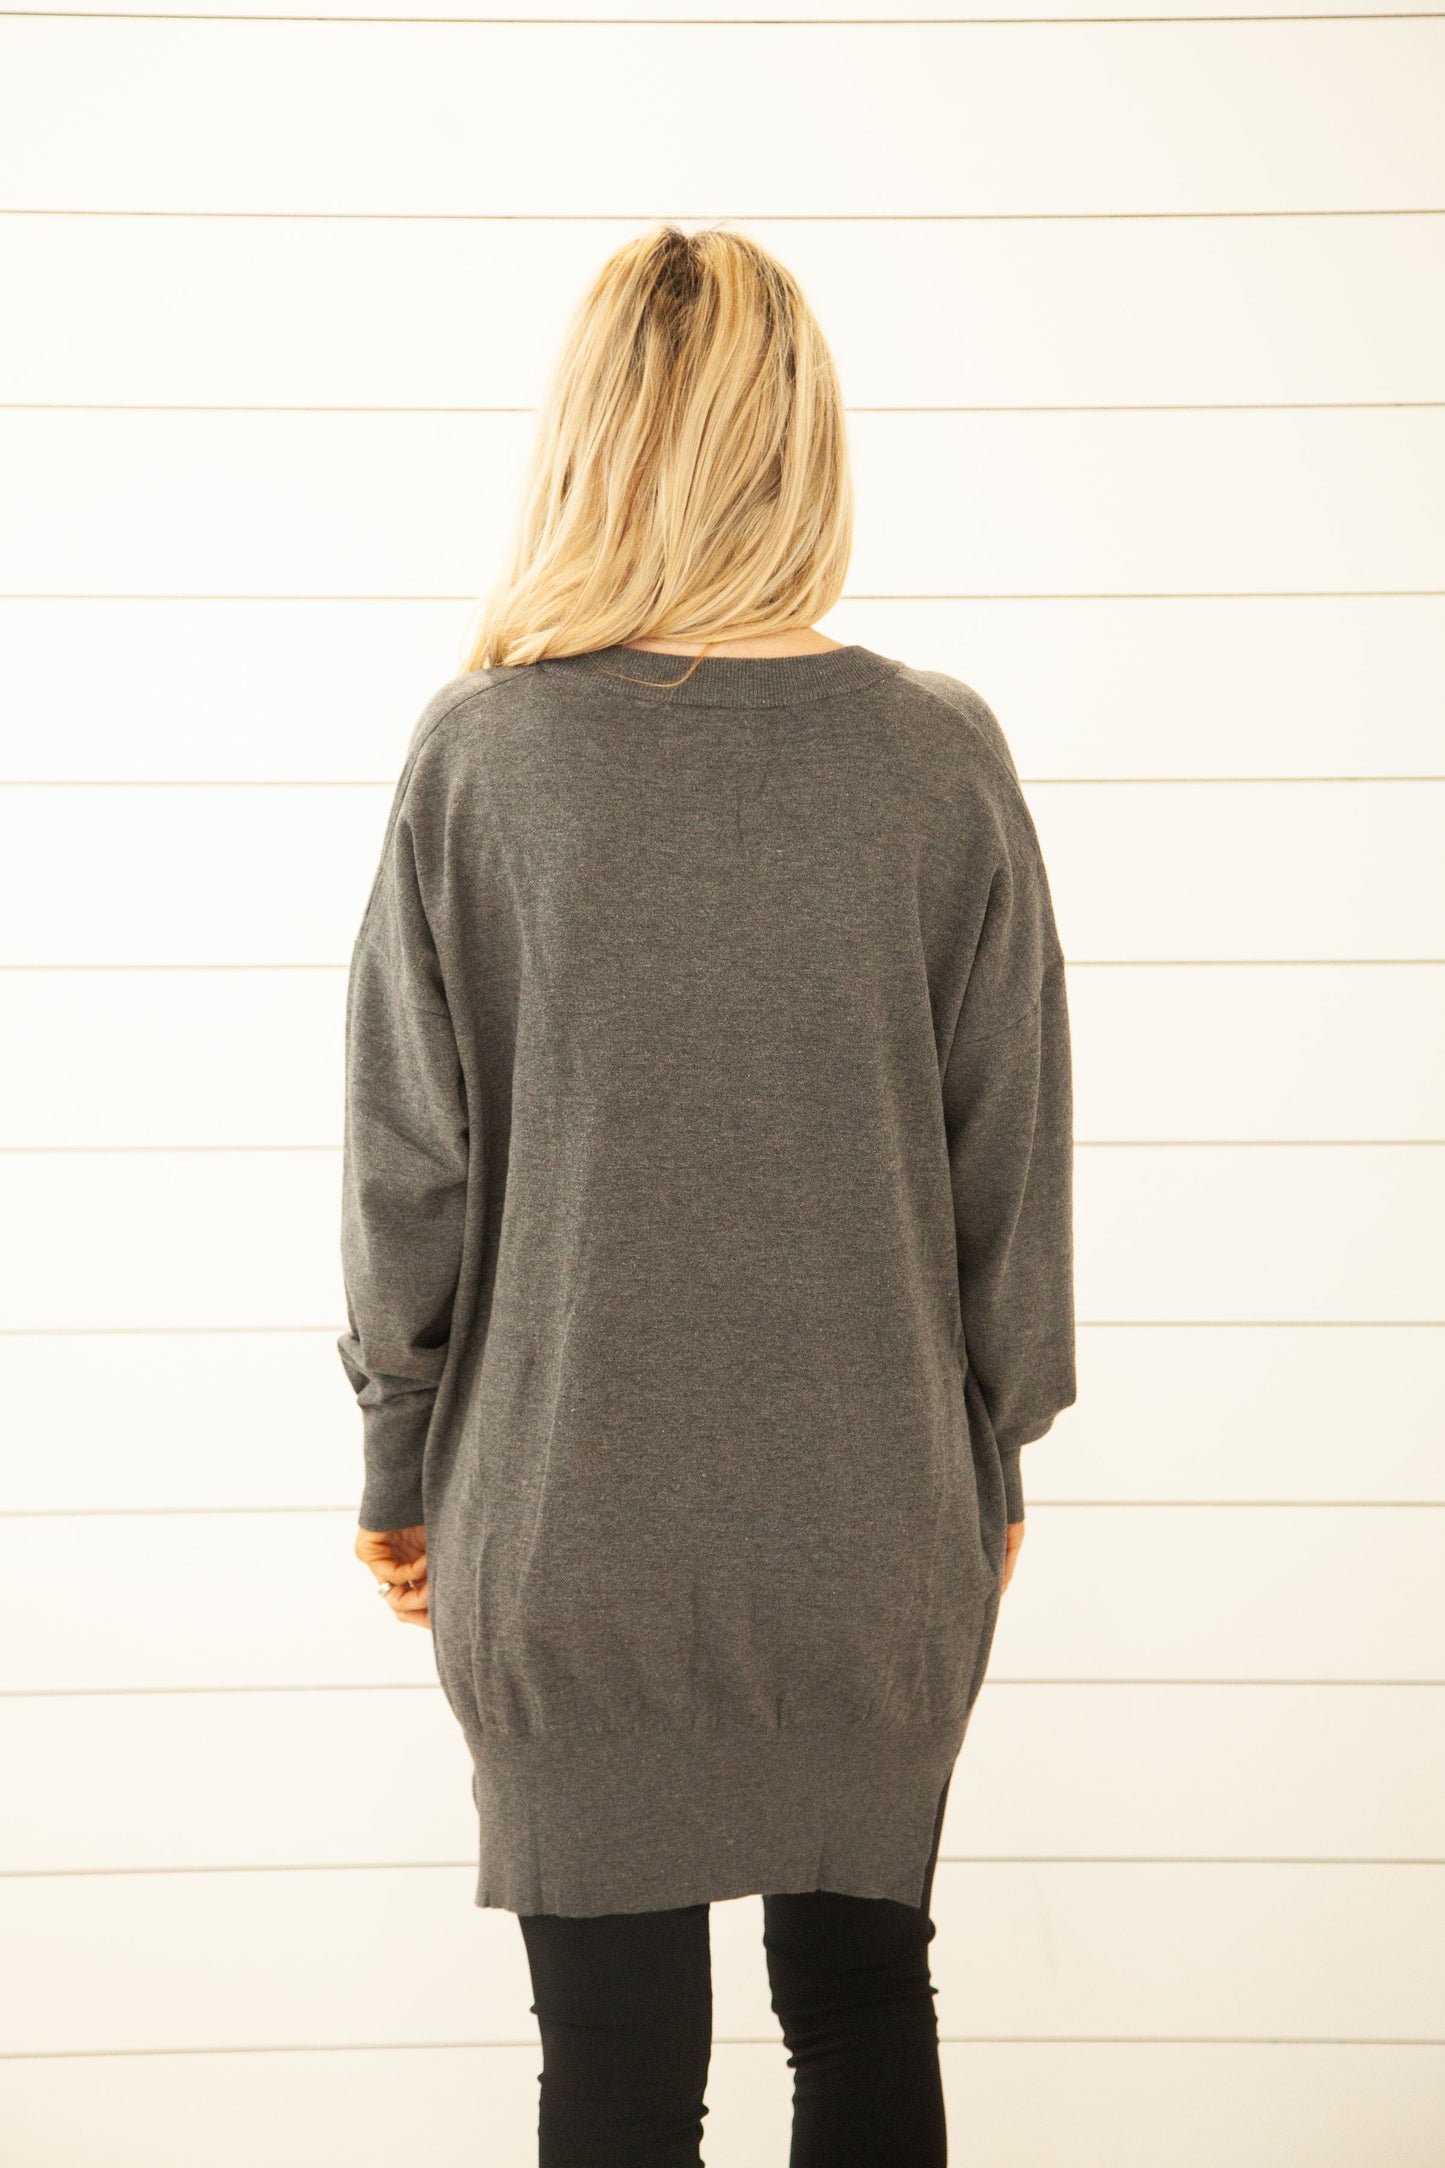 Caught My Eye Charcoal V Neck Soft Sweater